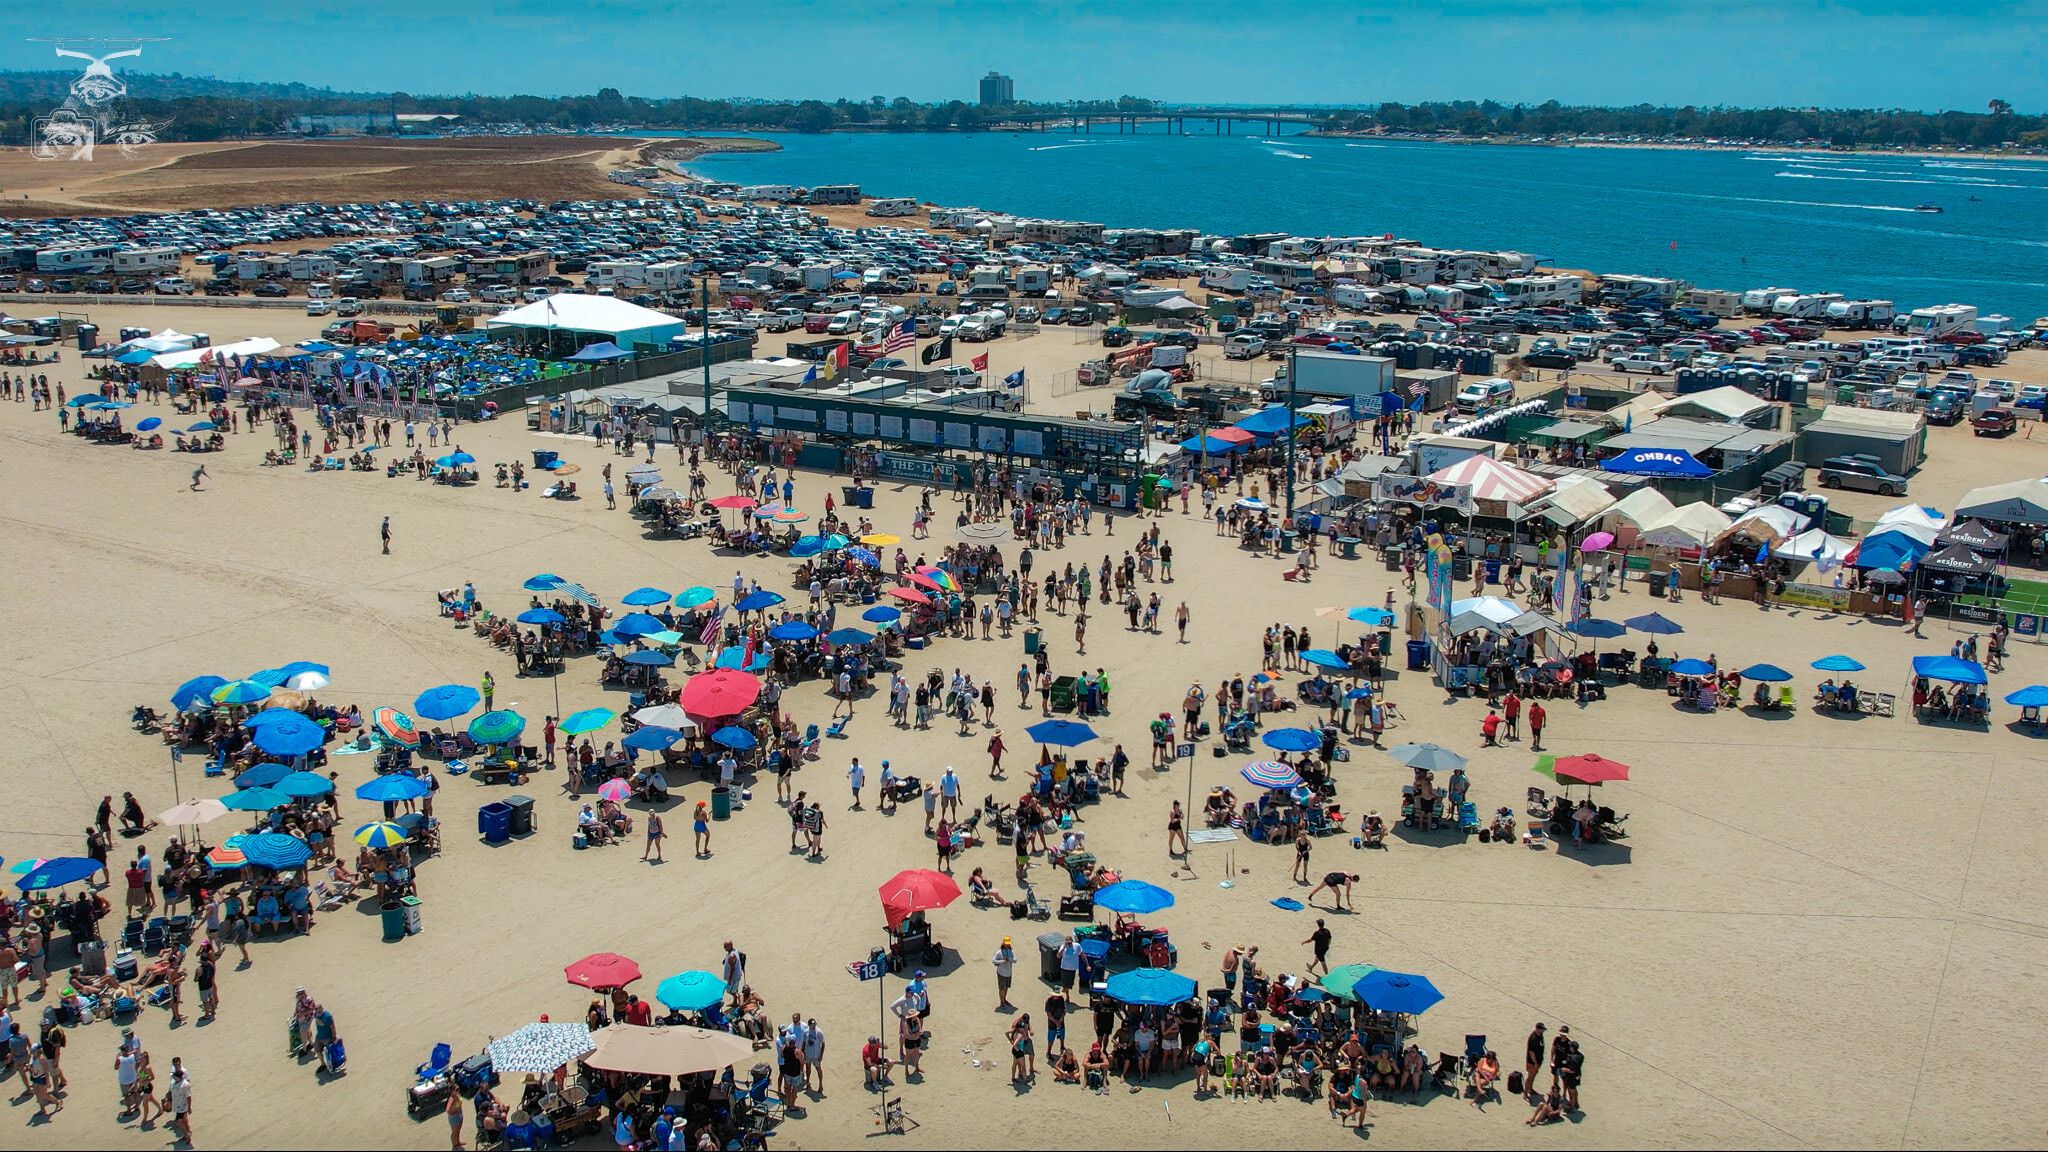 The 2023 Over The Line Championship drew thousands to Fiesta Island in San Diego's Mission Bay. 